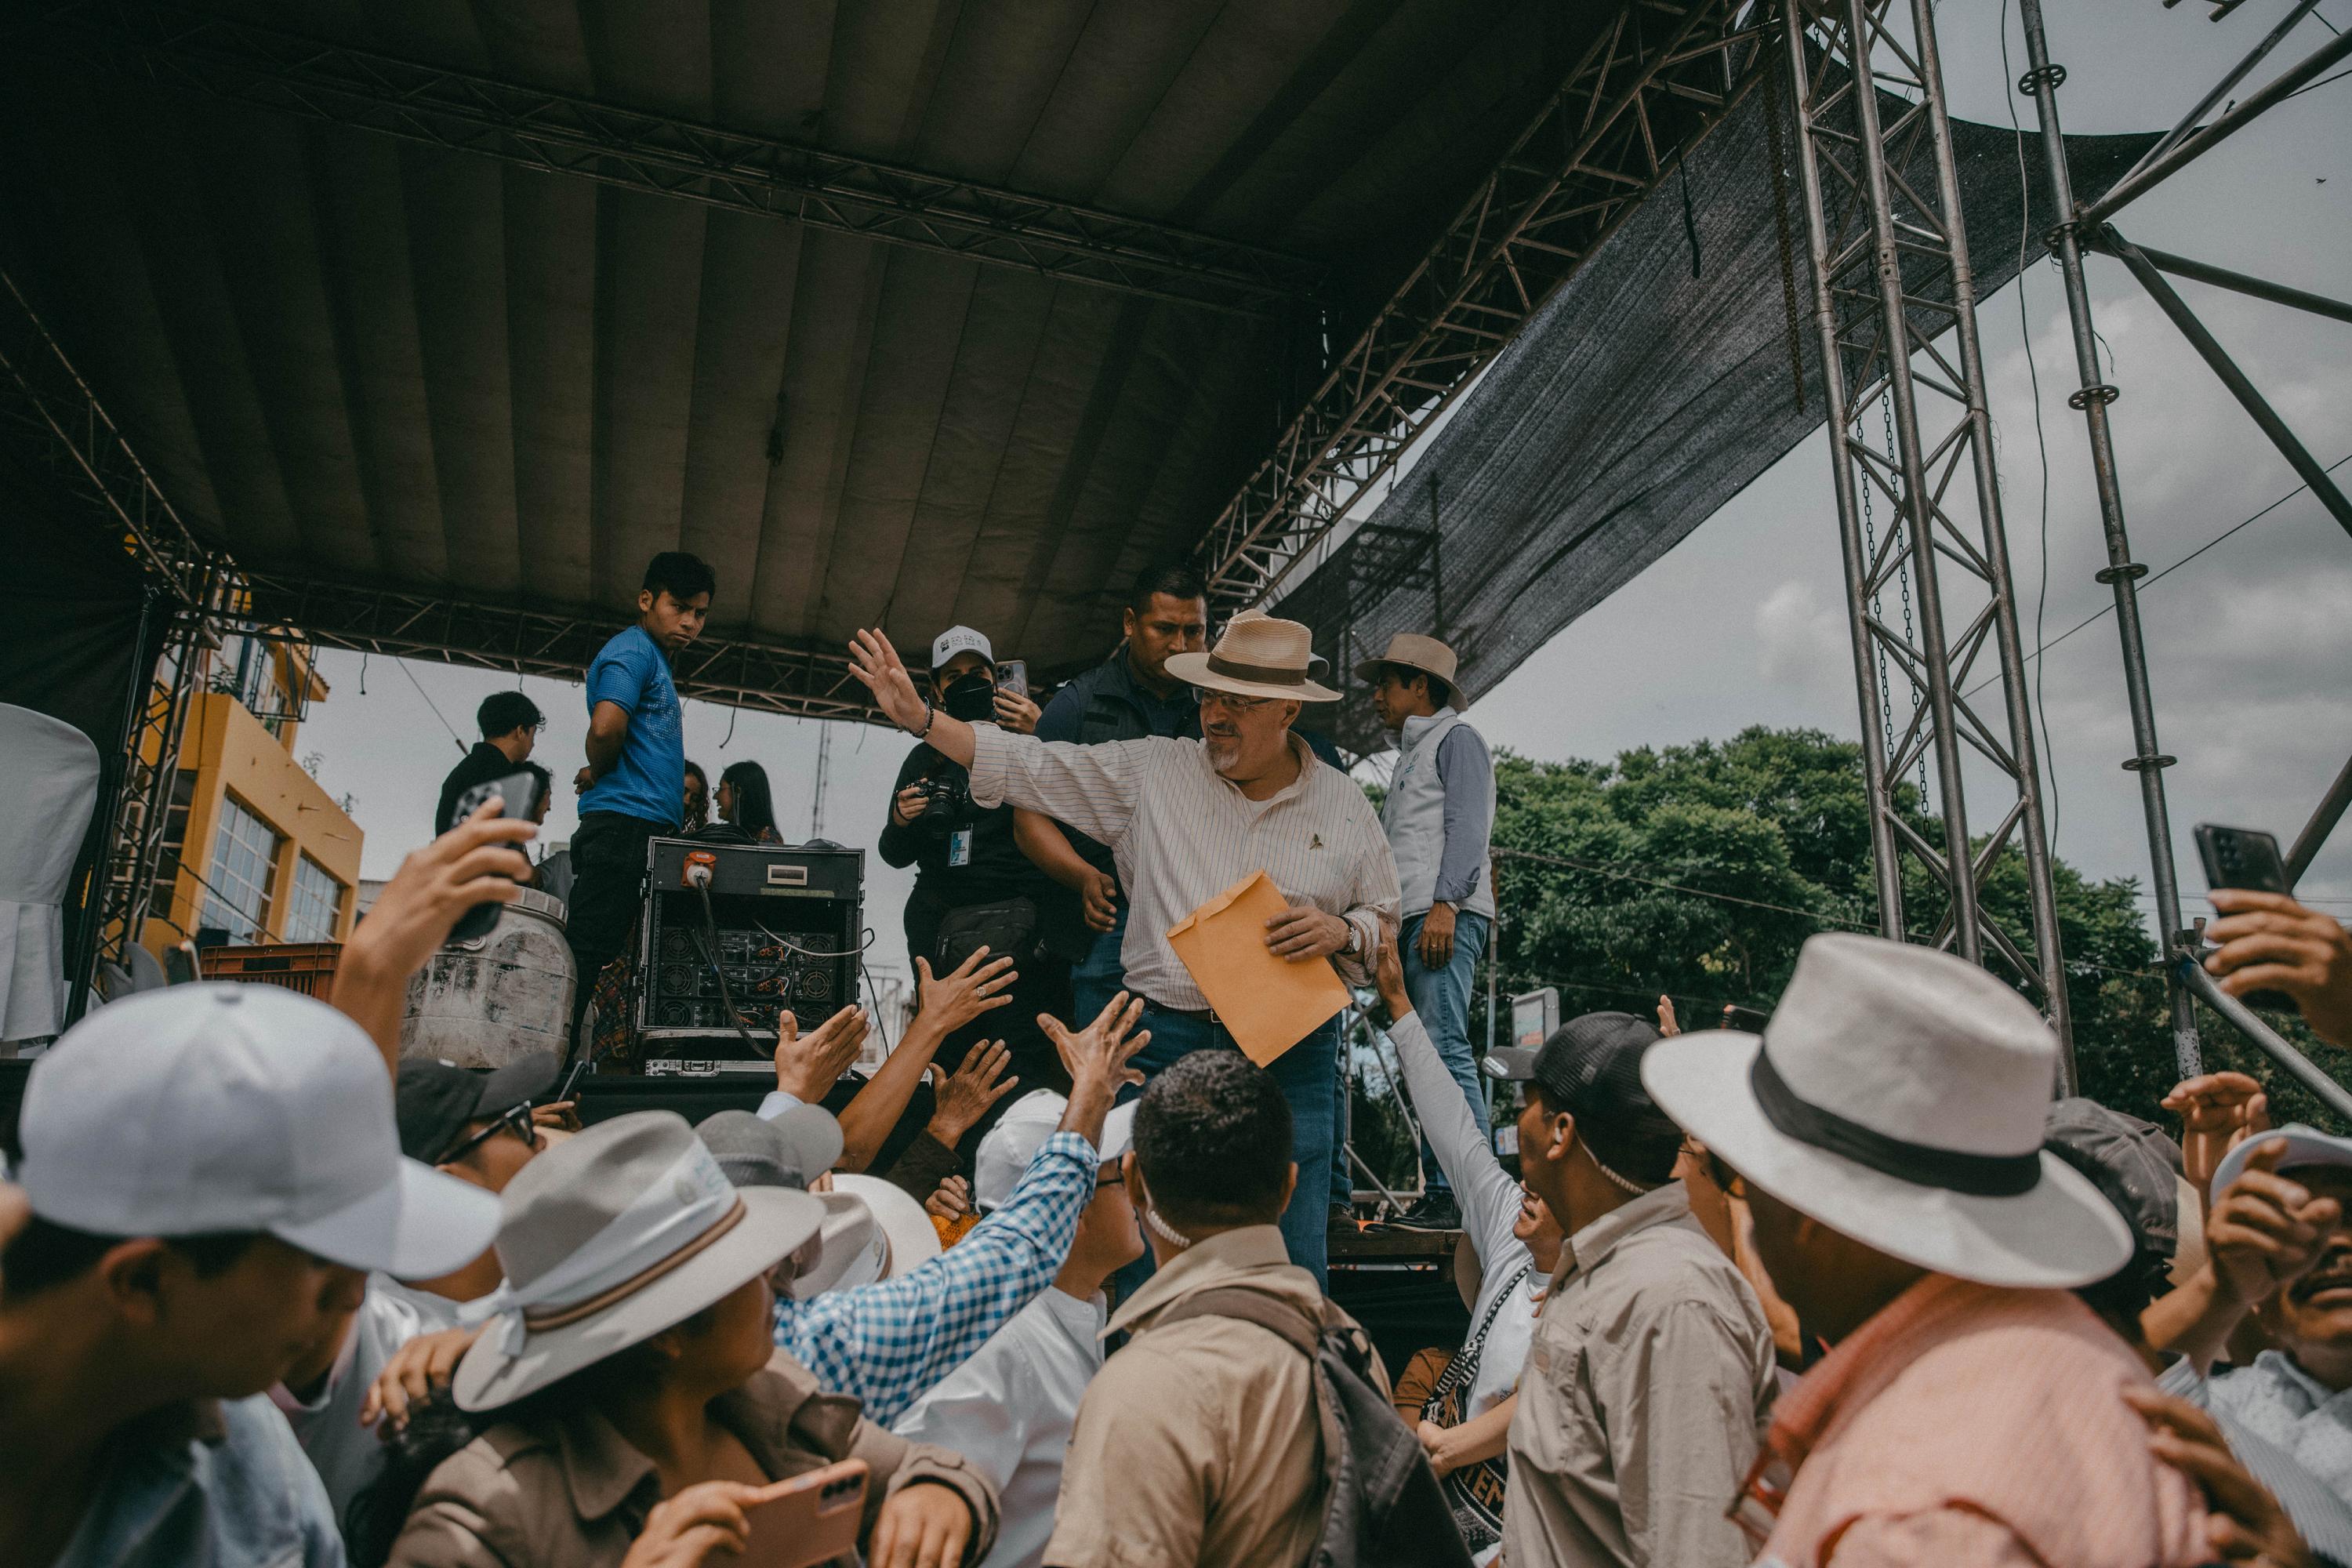 During the last weekend of campaigning before the second round of elections, Arévalo toured western Guatemala. On August 11, after his rally at a town square full of supporters in Santa Cruz del Quiché, dozens of people waited to shake his hand as he stepped off the stage before leaving for Huehuetenango.